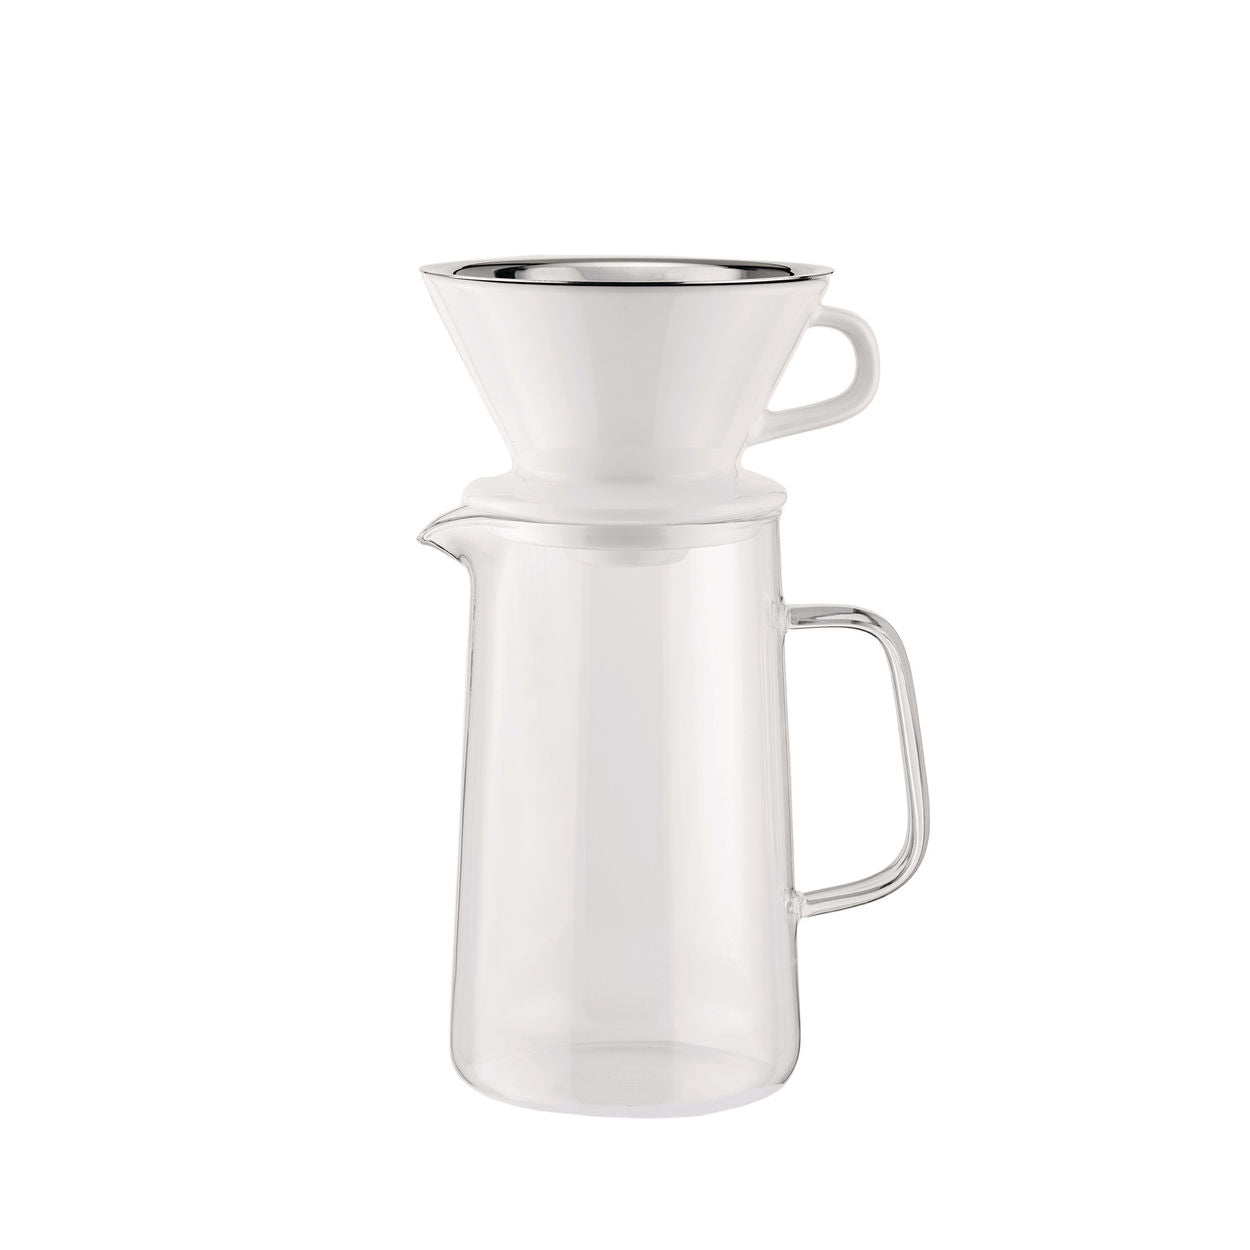 Alessi Slow Coffee, Accessories For Coffee Grinder (Jug + Net Filer + Filter Holder)